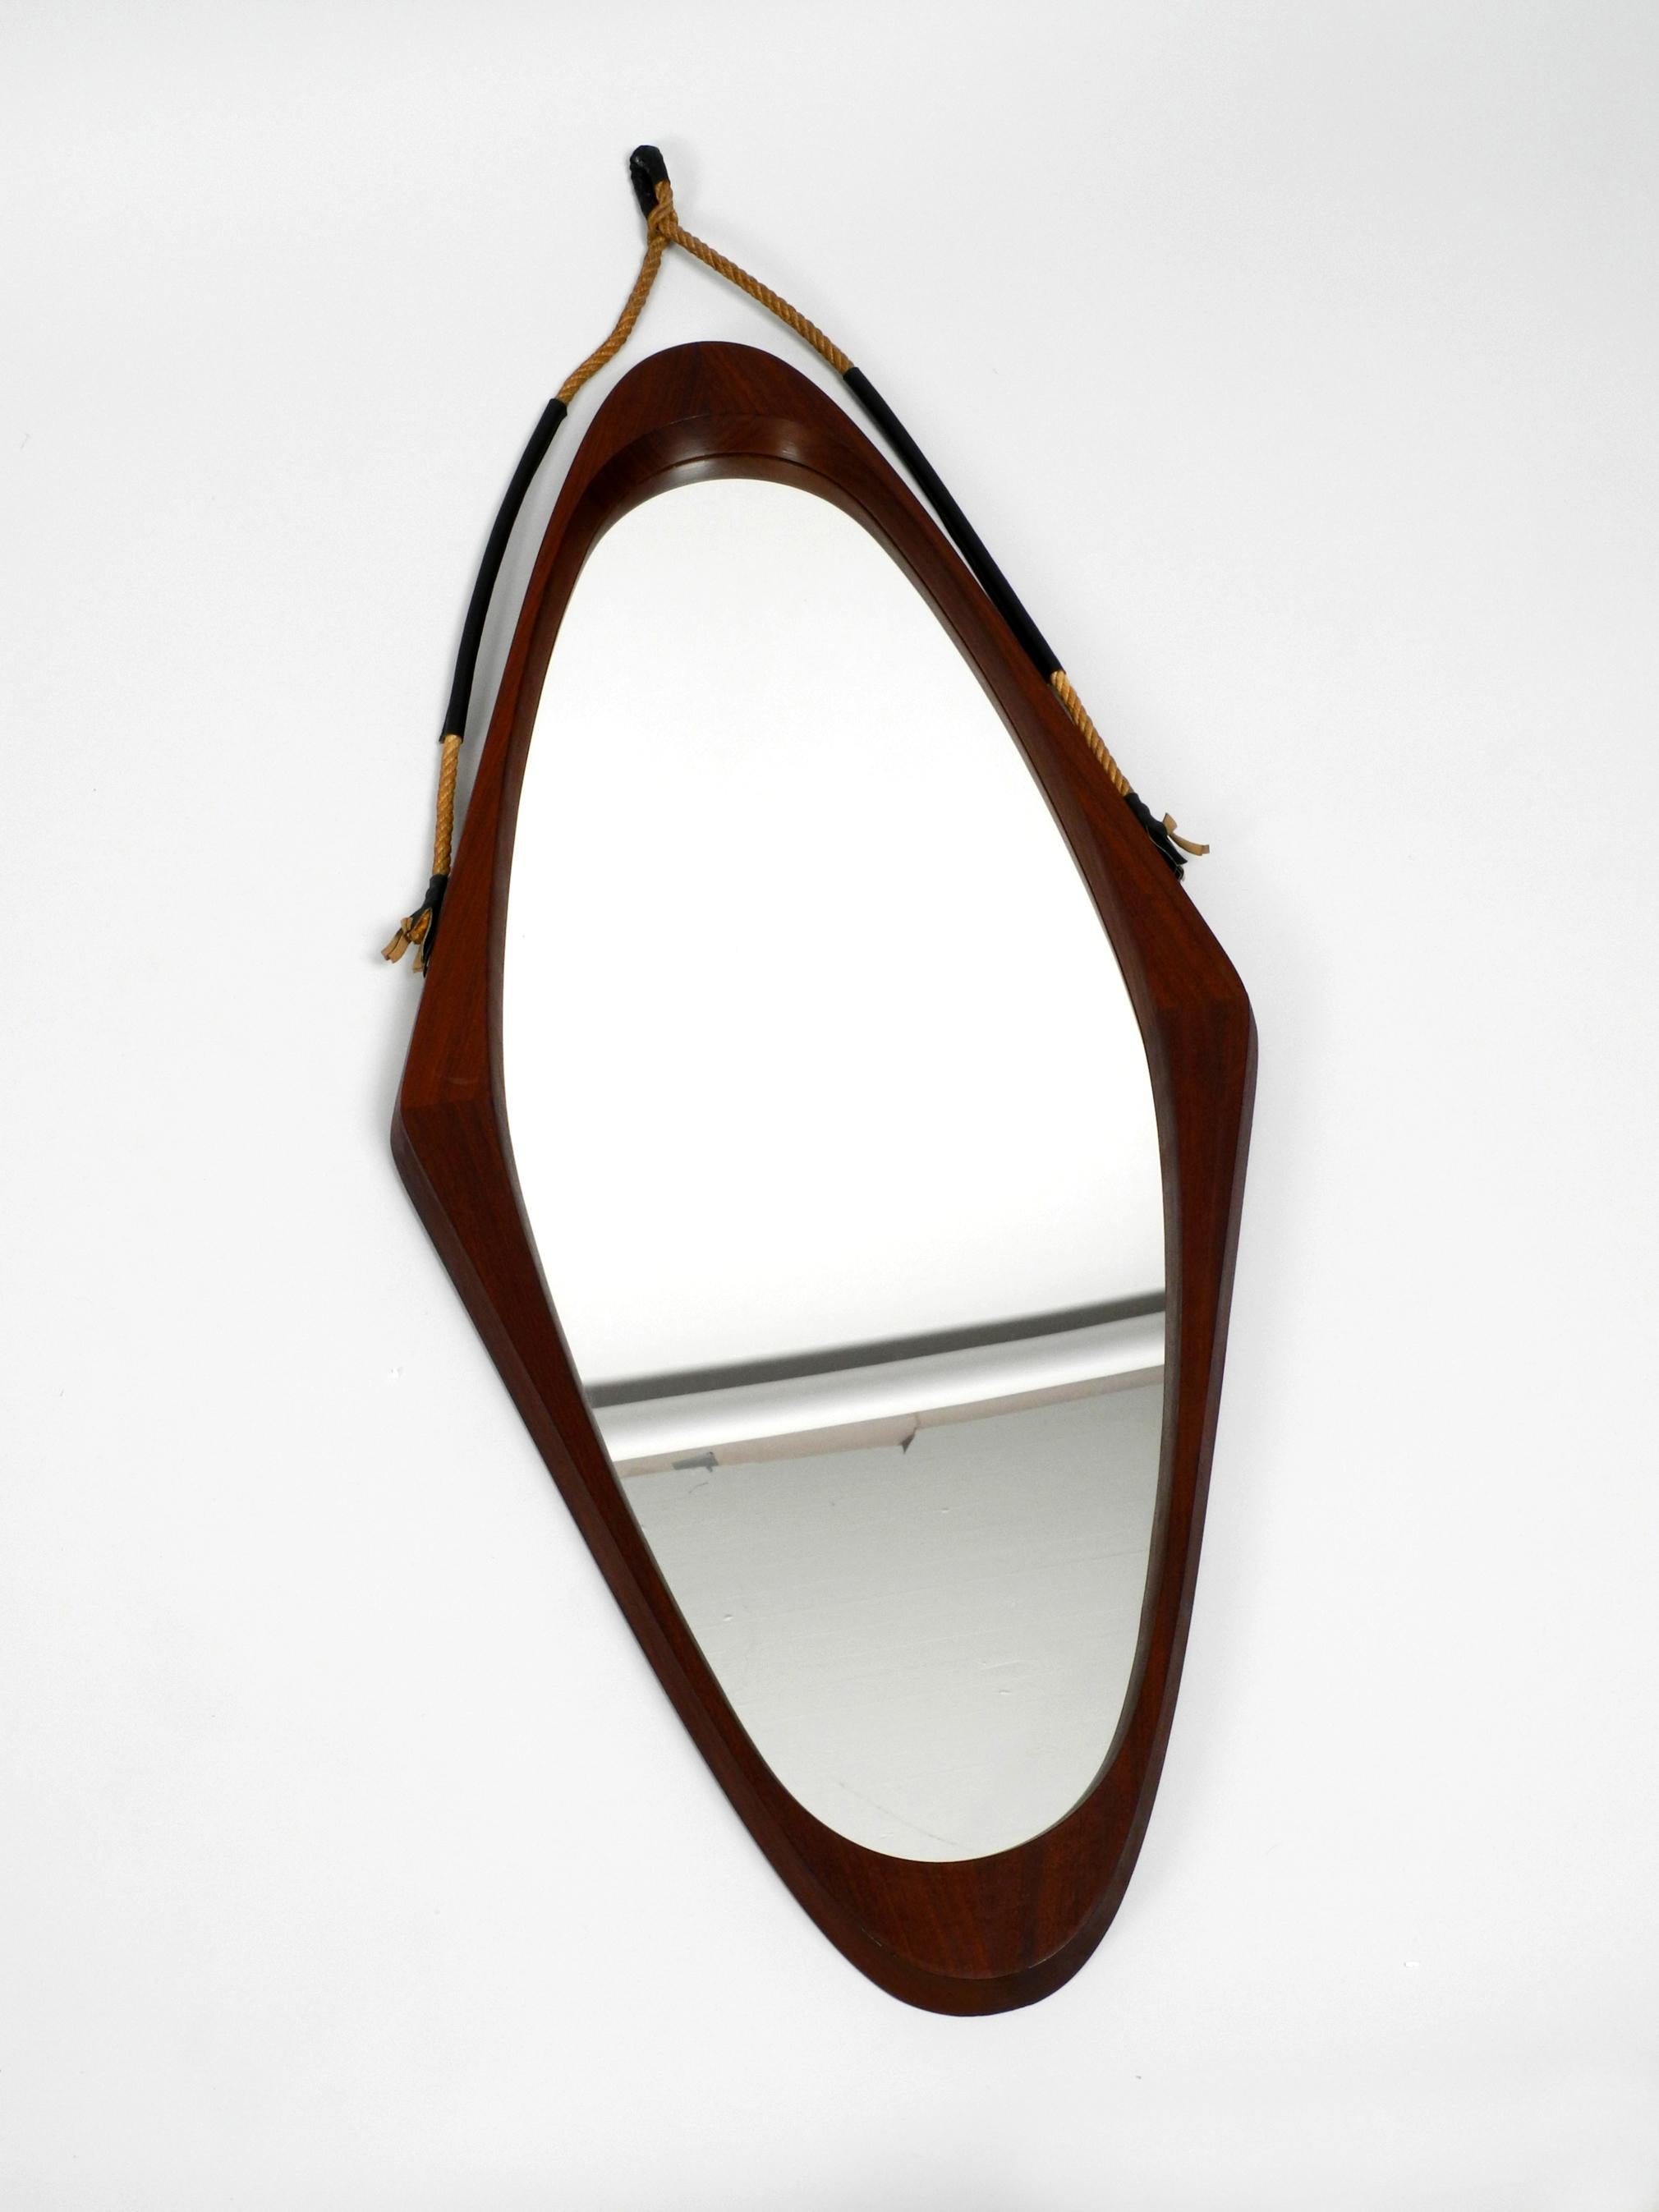 1960s Large Rhombus-Shaped Teak Wall Mirror with Thick Rope for Hanging 13